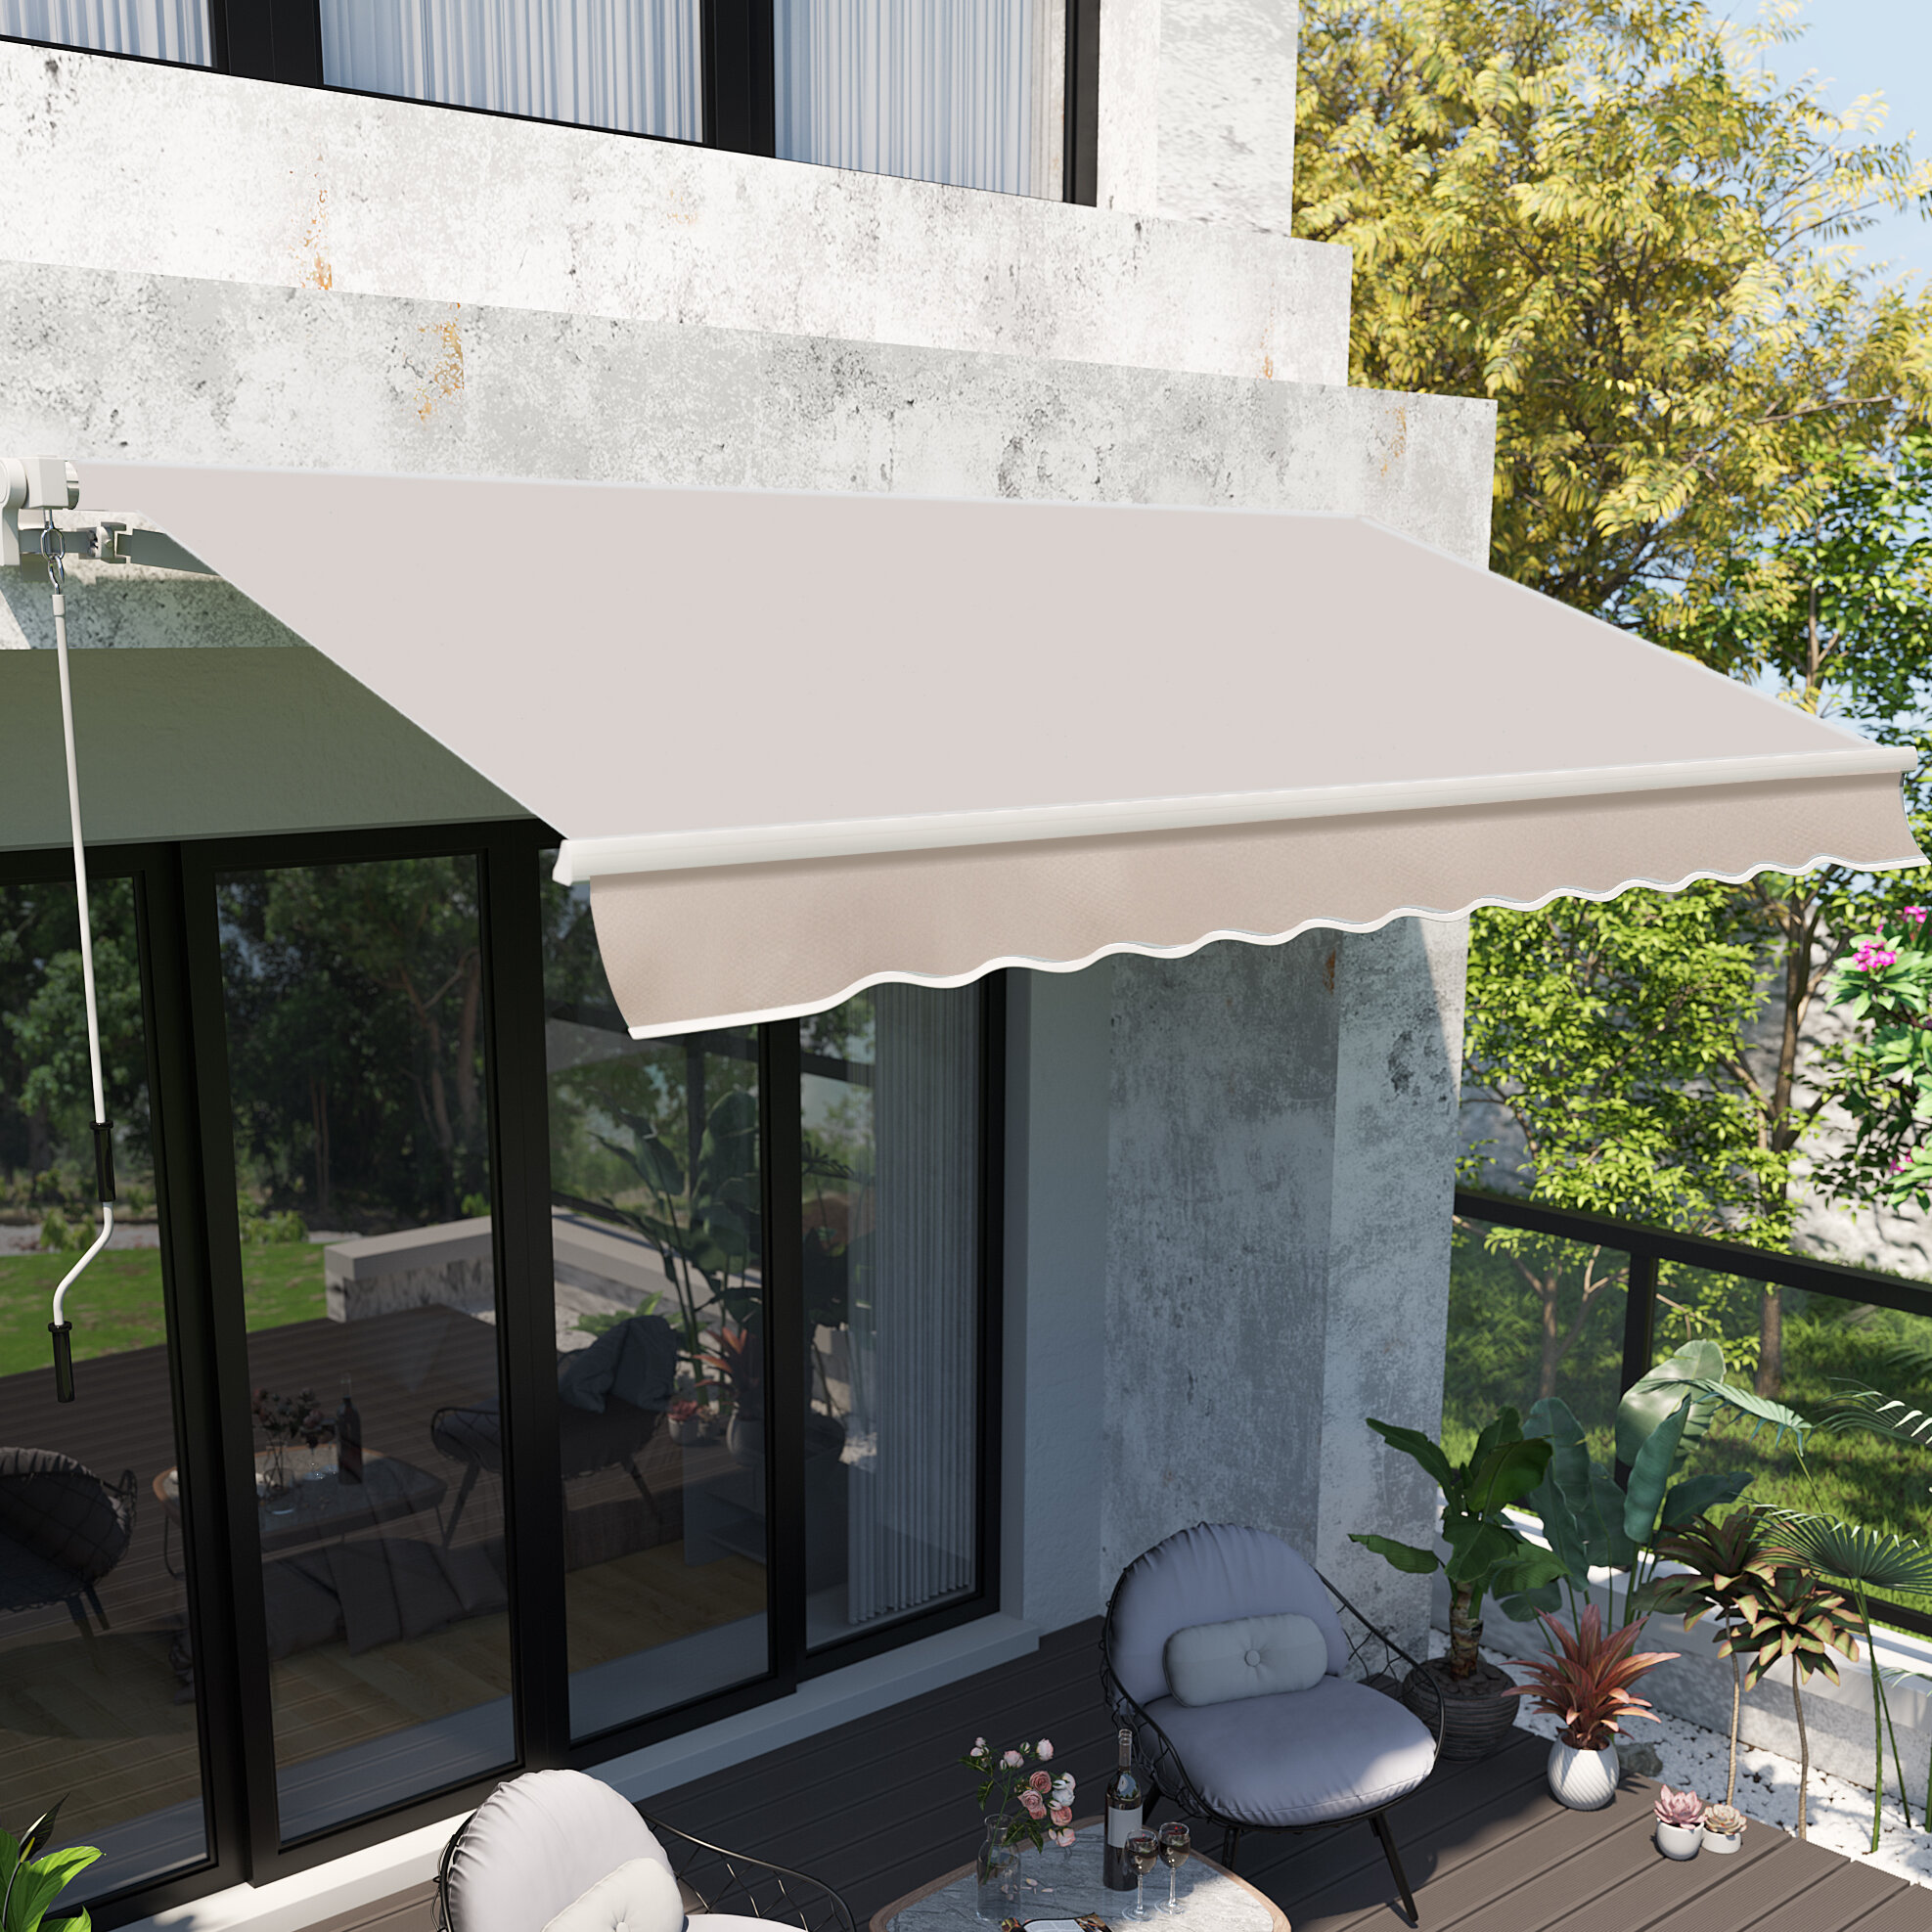 200cm x 600cm, Grey LARS360 Side Awning Retractable Extendable Polyester Awning Blind Patio Sunshade Outdoor Privacy Screen for Balcony Terrace and Garden